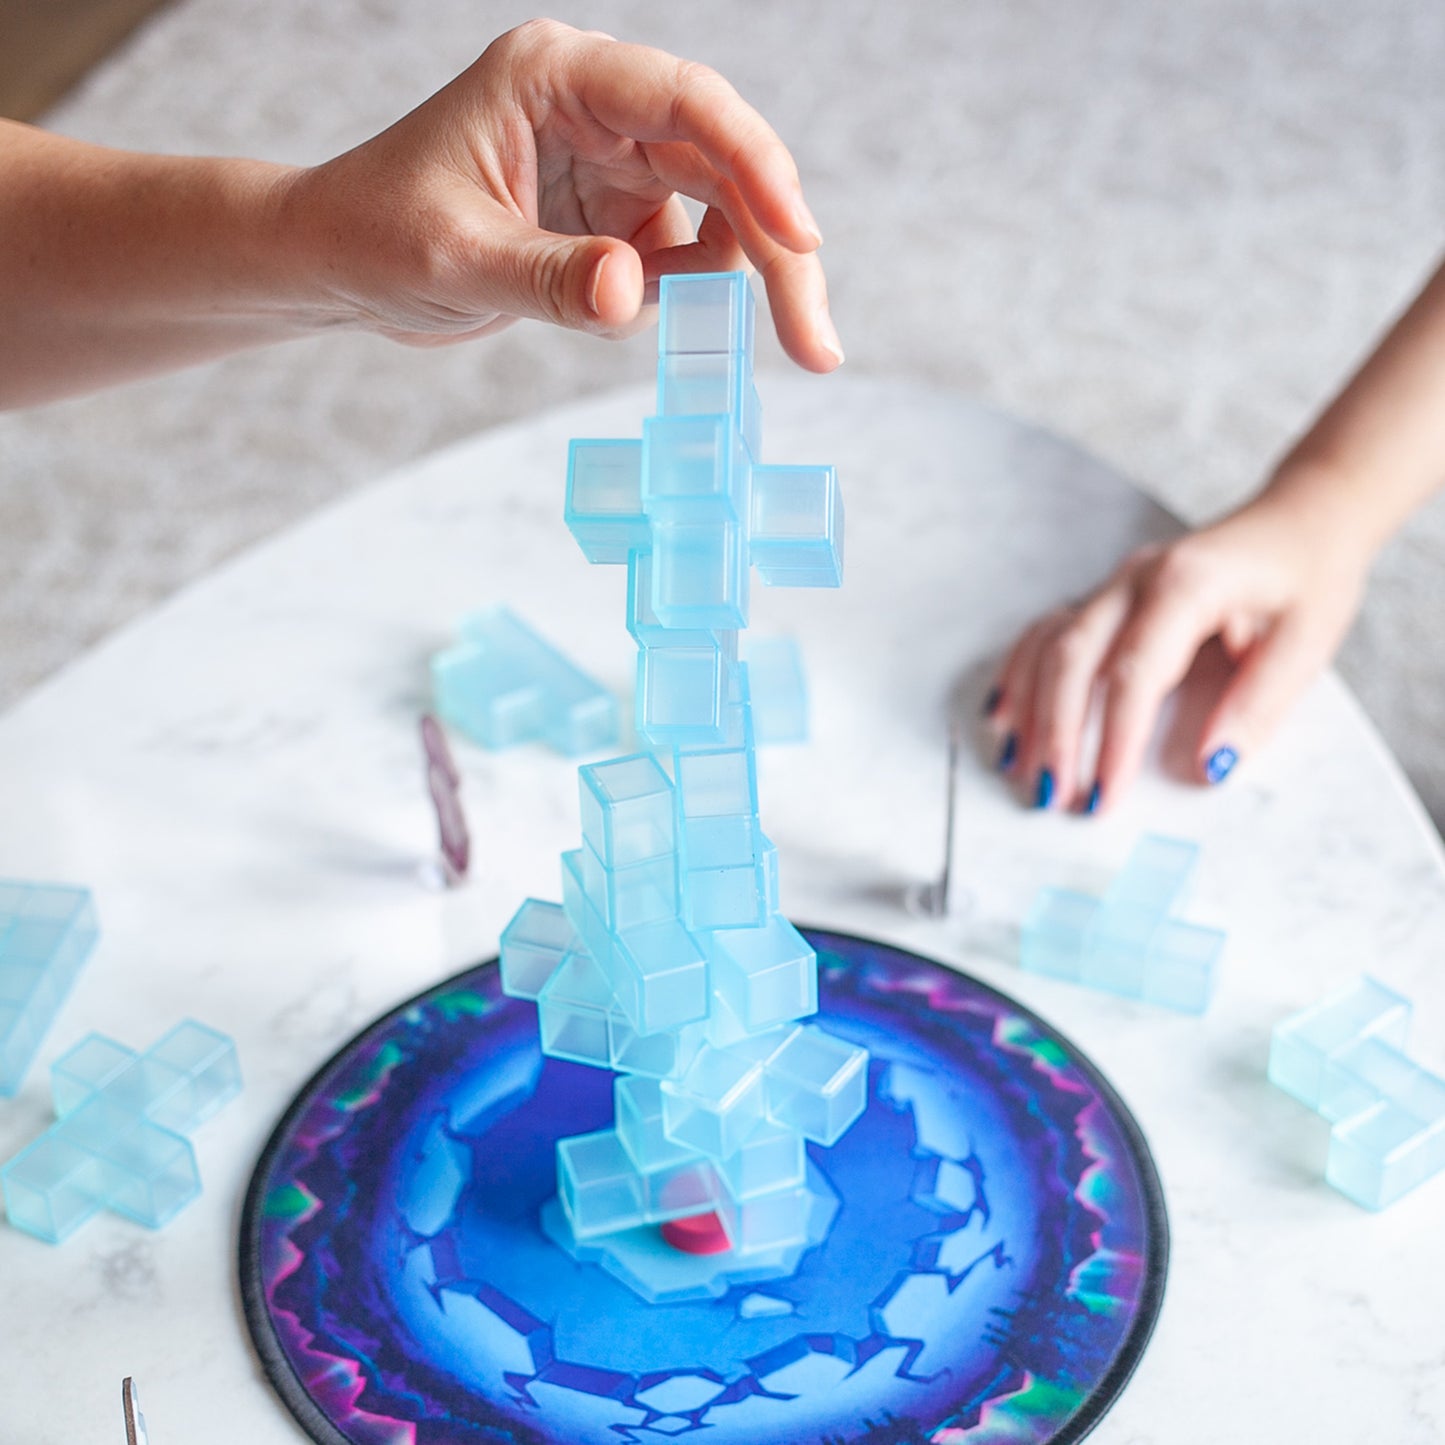 Ice Tumble by SimplyFun is a fun spatial reasoning and block stacking game focusing on fine motor skills for ages 7 and up.